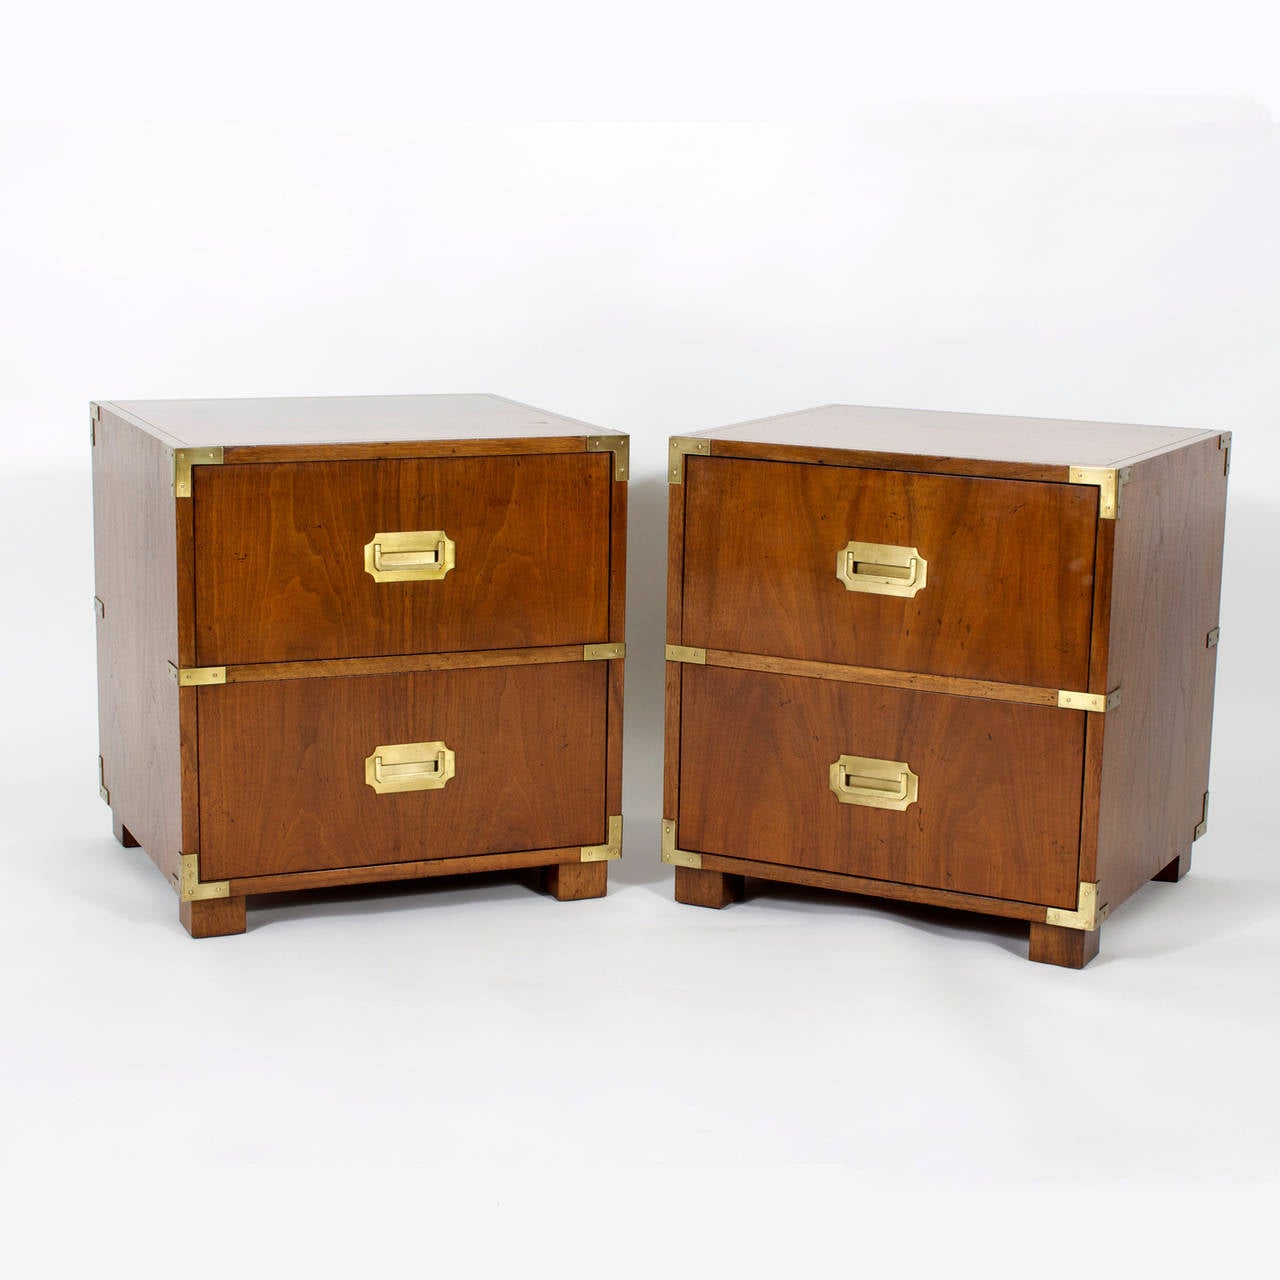 Handsome pair of mahogany Baker campaign style night stands with brass hardware, drop down drawer for extra table space and block feet. Labeled.
Newly polished.

